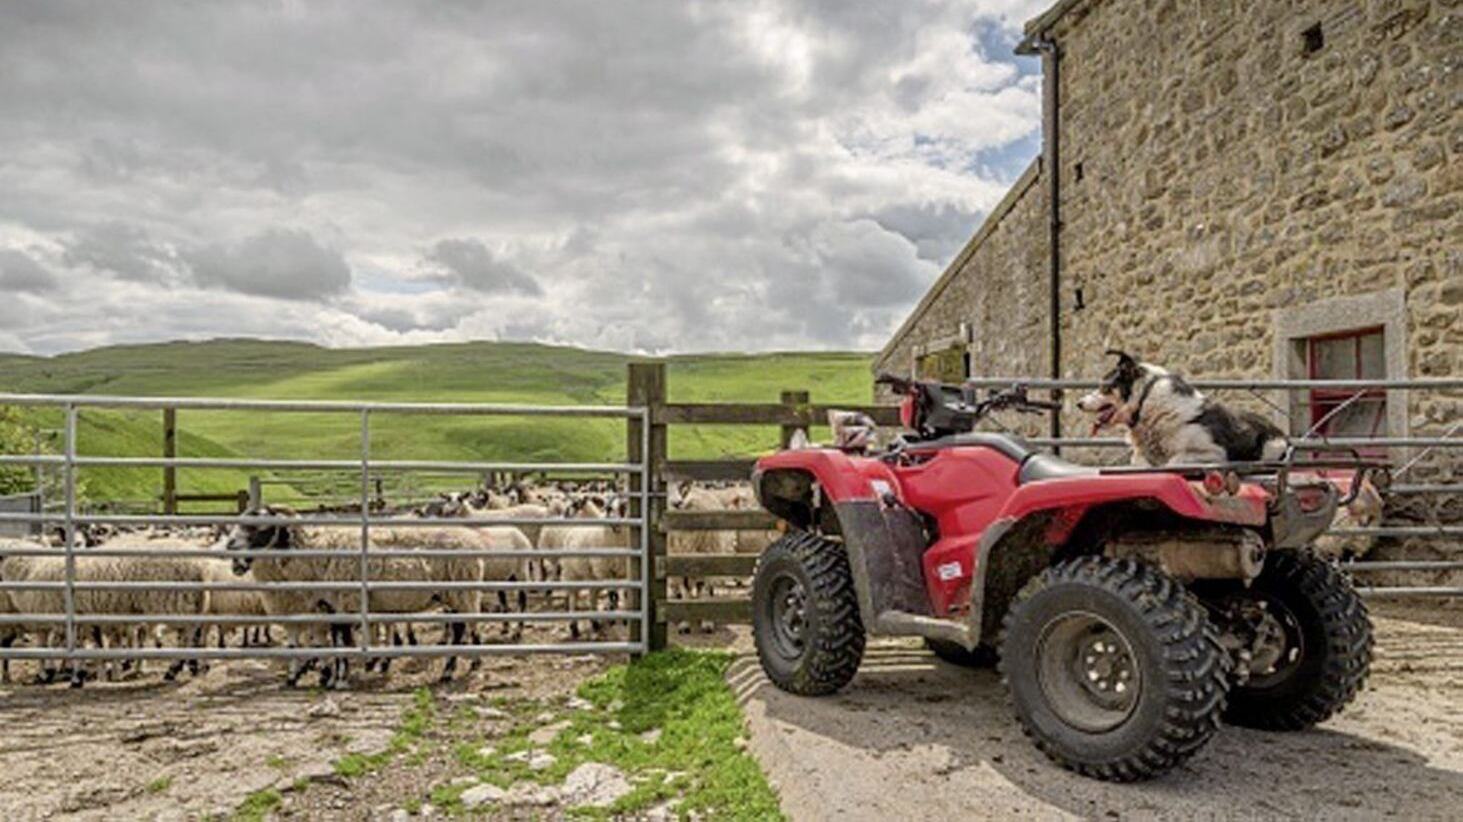 The latest figures from insurer NFU Mutual show that rural crime has increased in cost by 5.3 per cent on 2016, with quad bikes and ATVs (all terrain vehicles), livestock and tractors top of thieves&rsquo; wish-lists. 